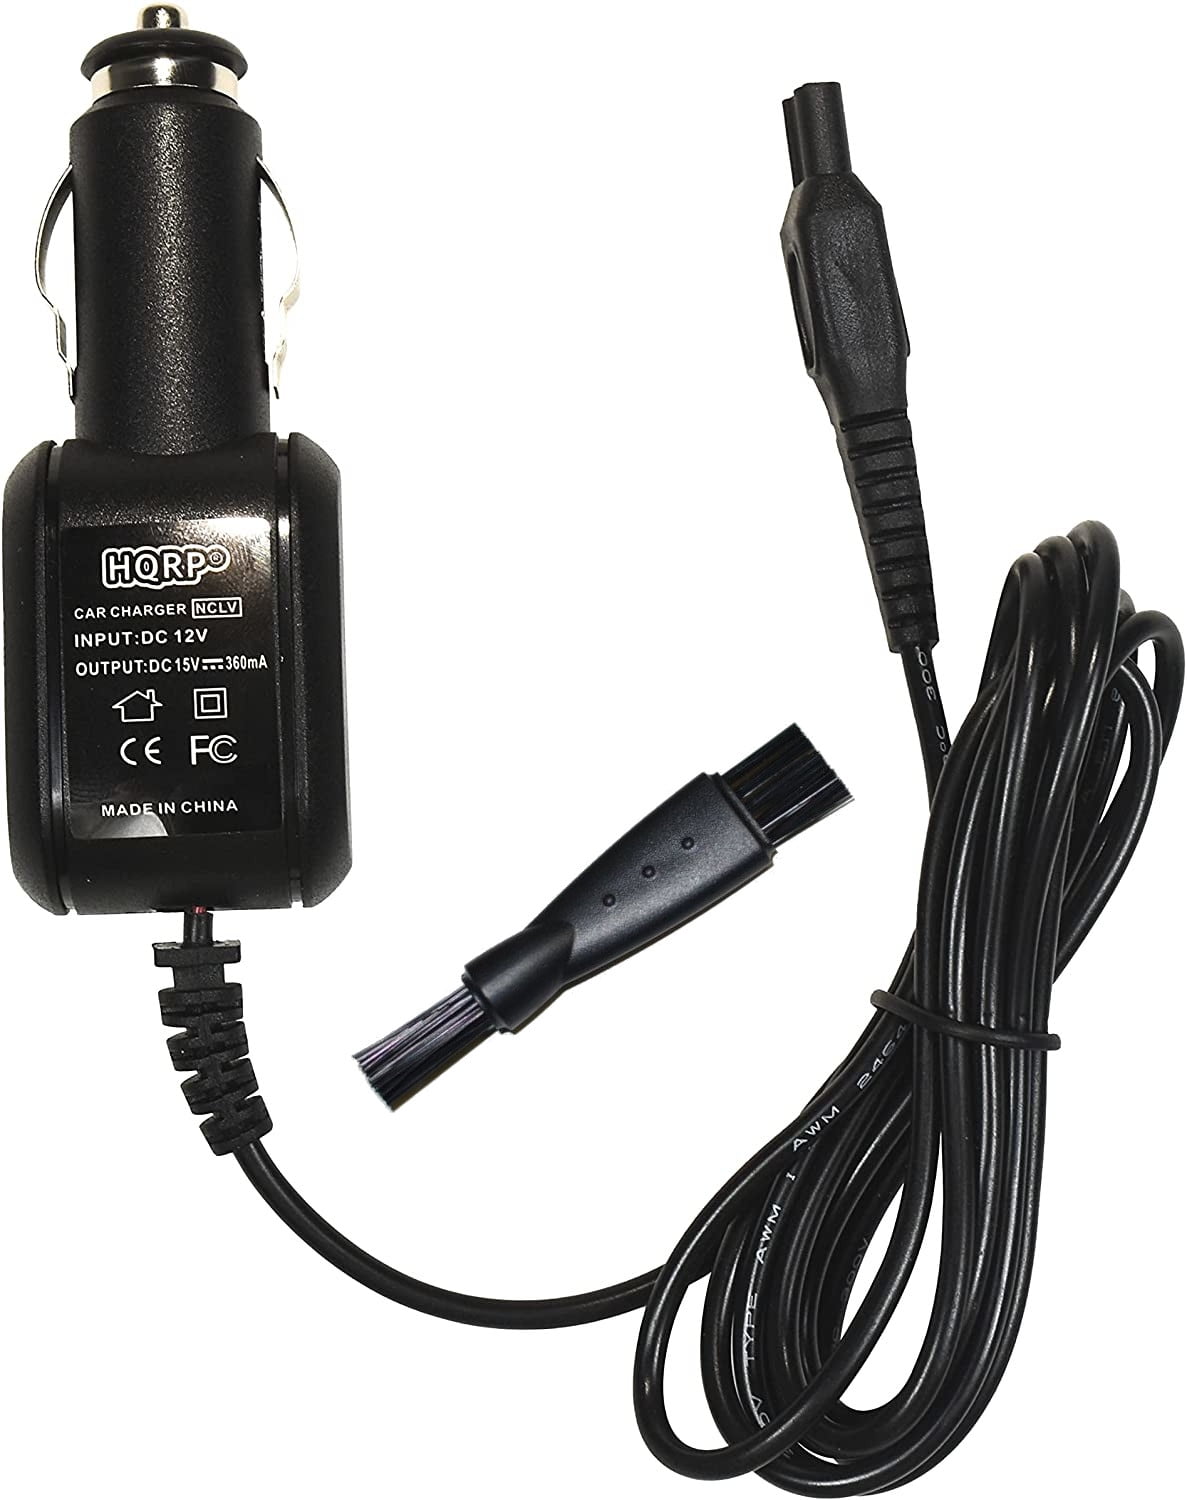 Super Power Supply® Charger Cord for Philips Norelco 8825XL Shaver Charger 